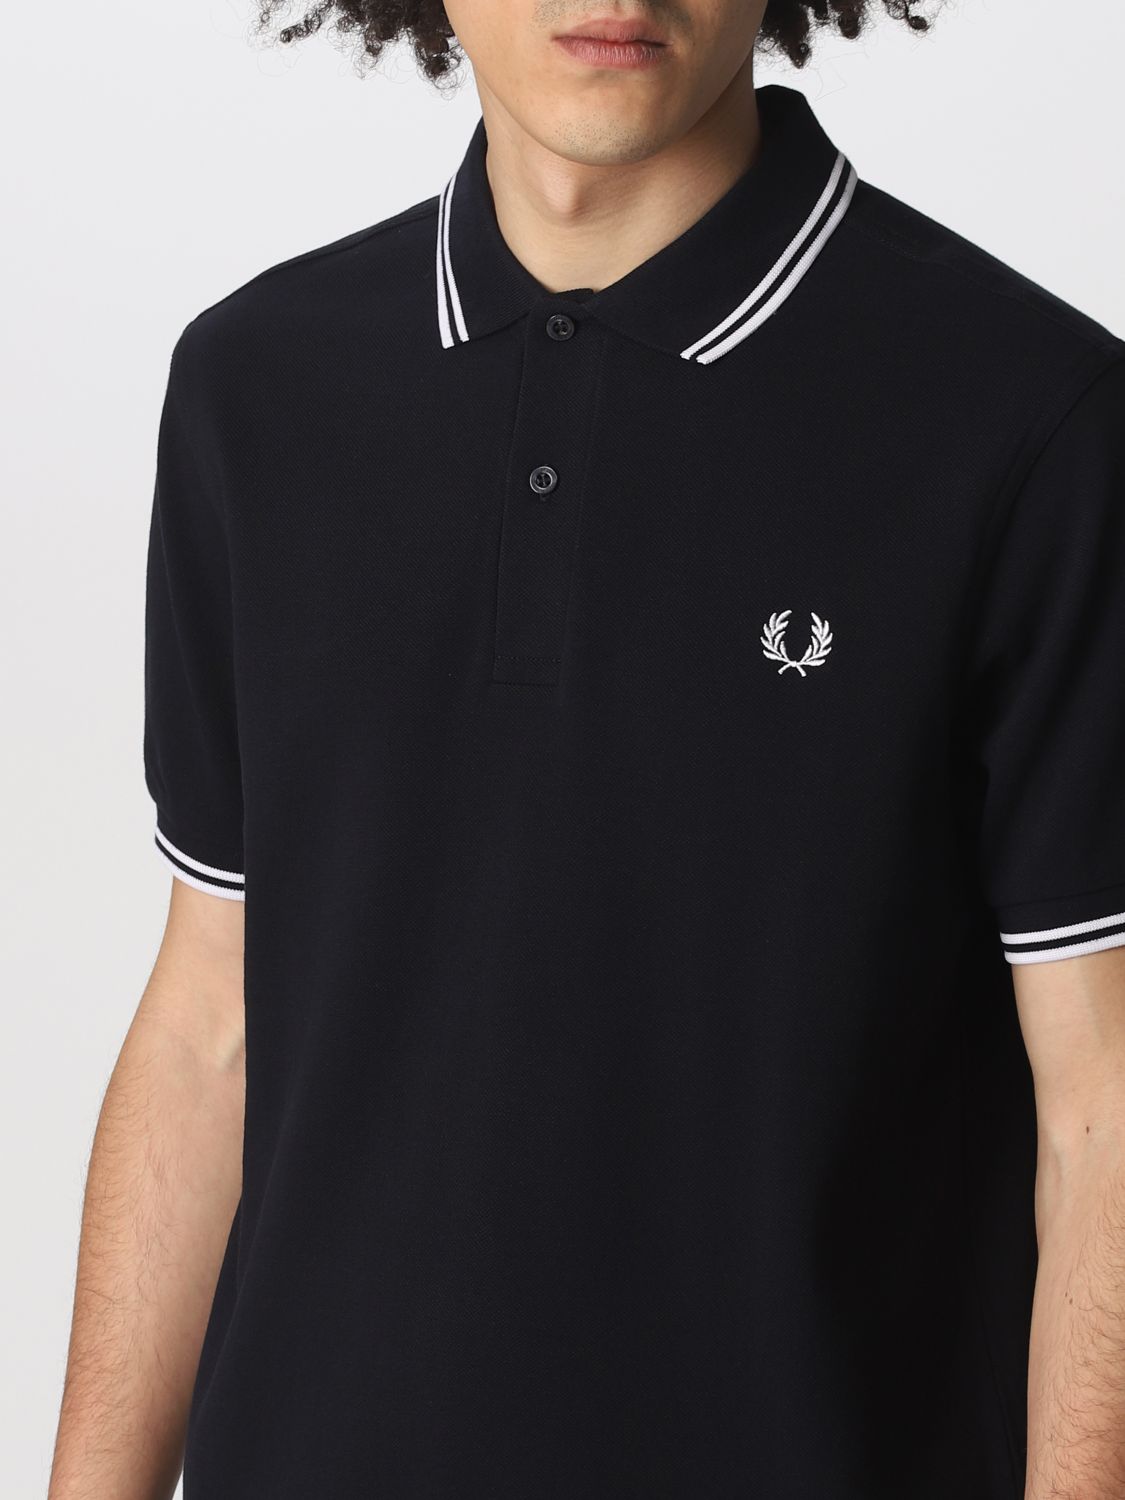 FRED PERRY: ポロシャツ メンズ - ネイビー | ポロシャツ Fred Perry M3600 GIGLIO.COM